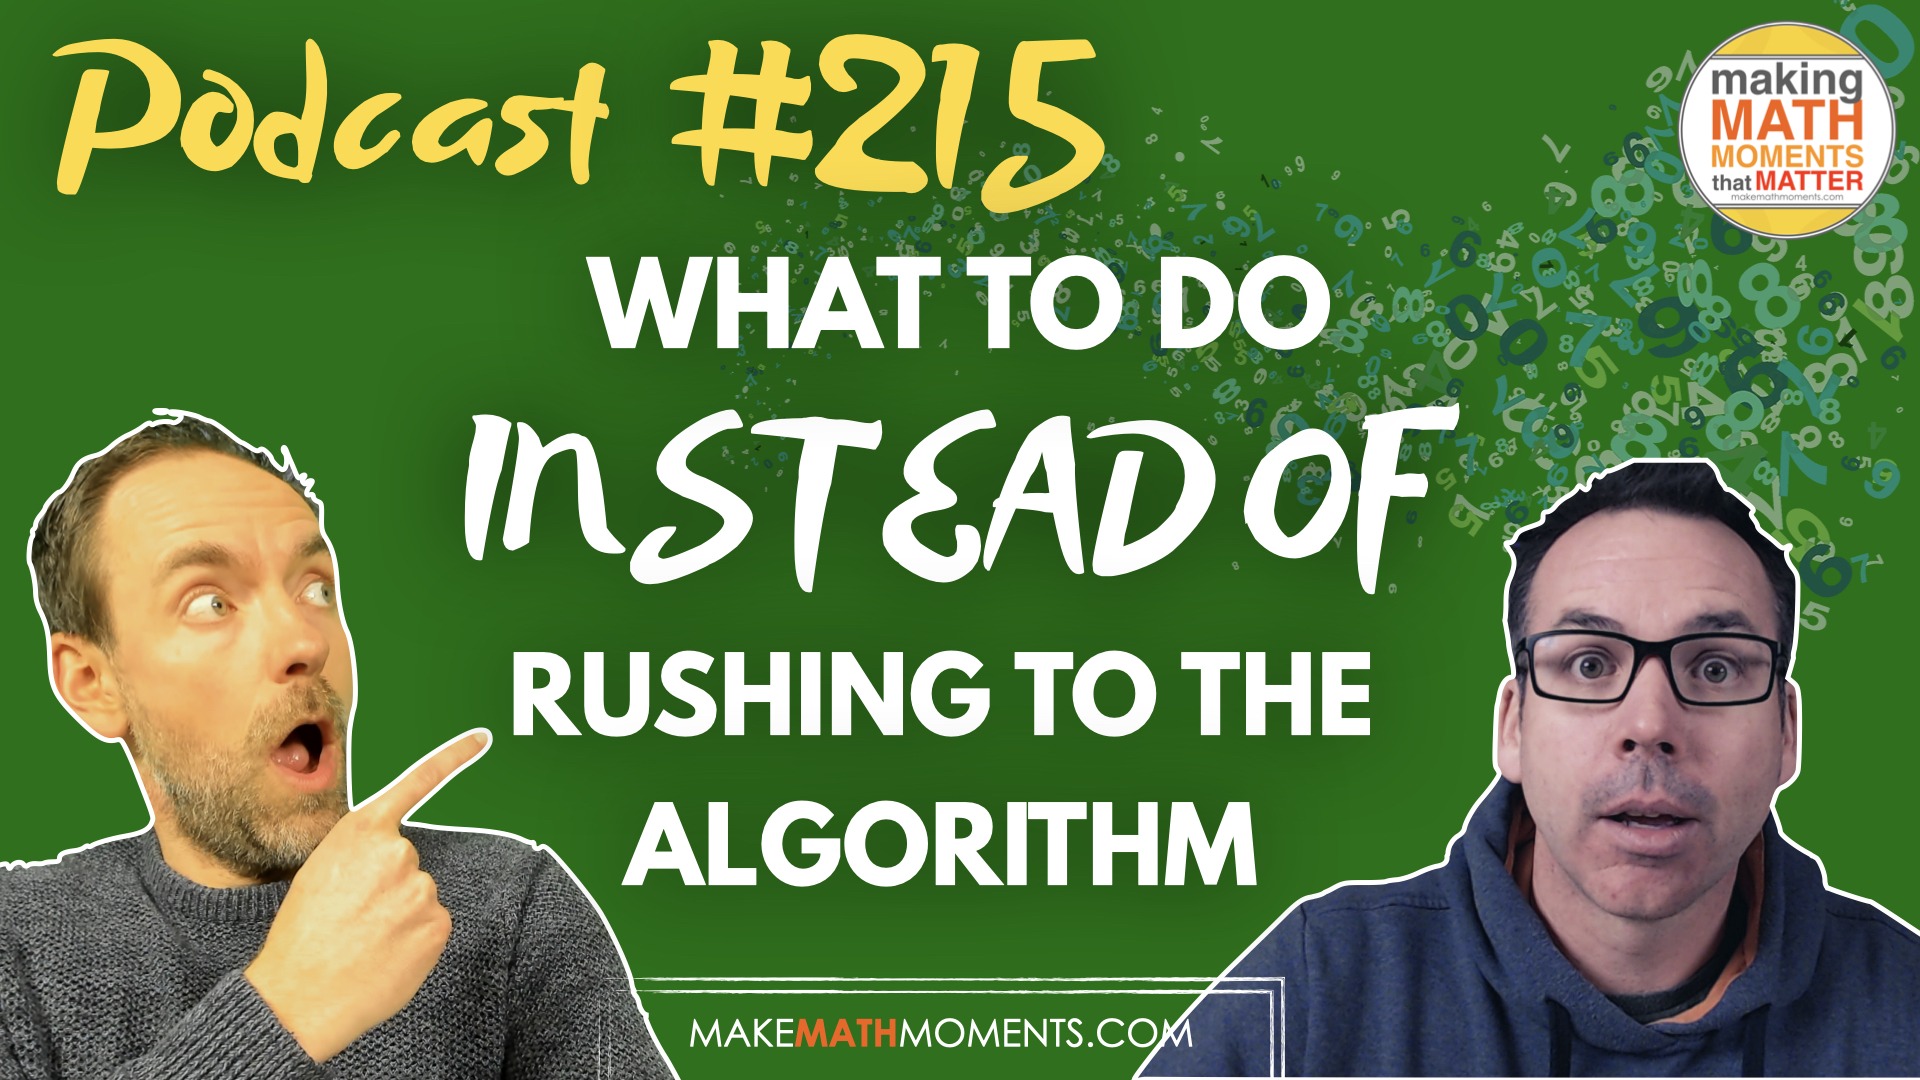 Episode #215: What To Do Instead of Rushing to the Algorithm – A Math Mentoring Moment